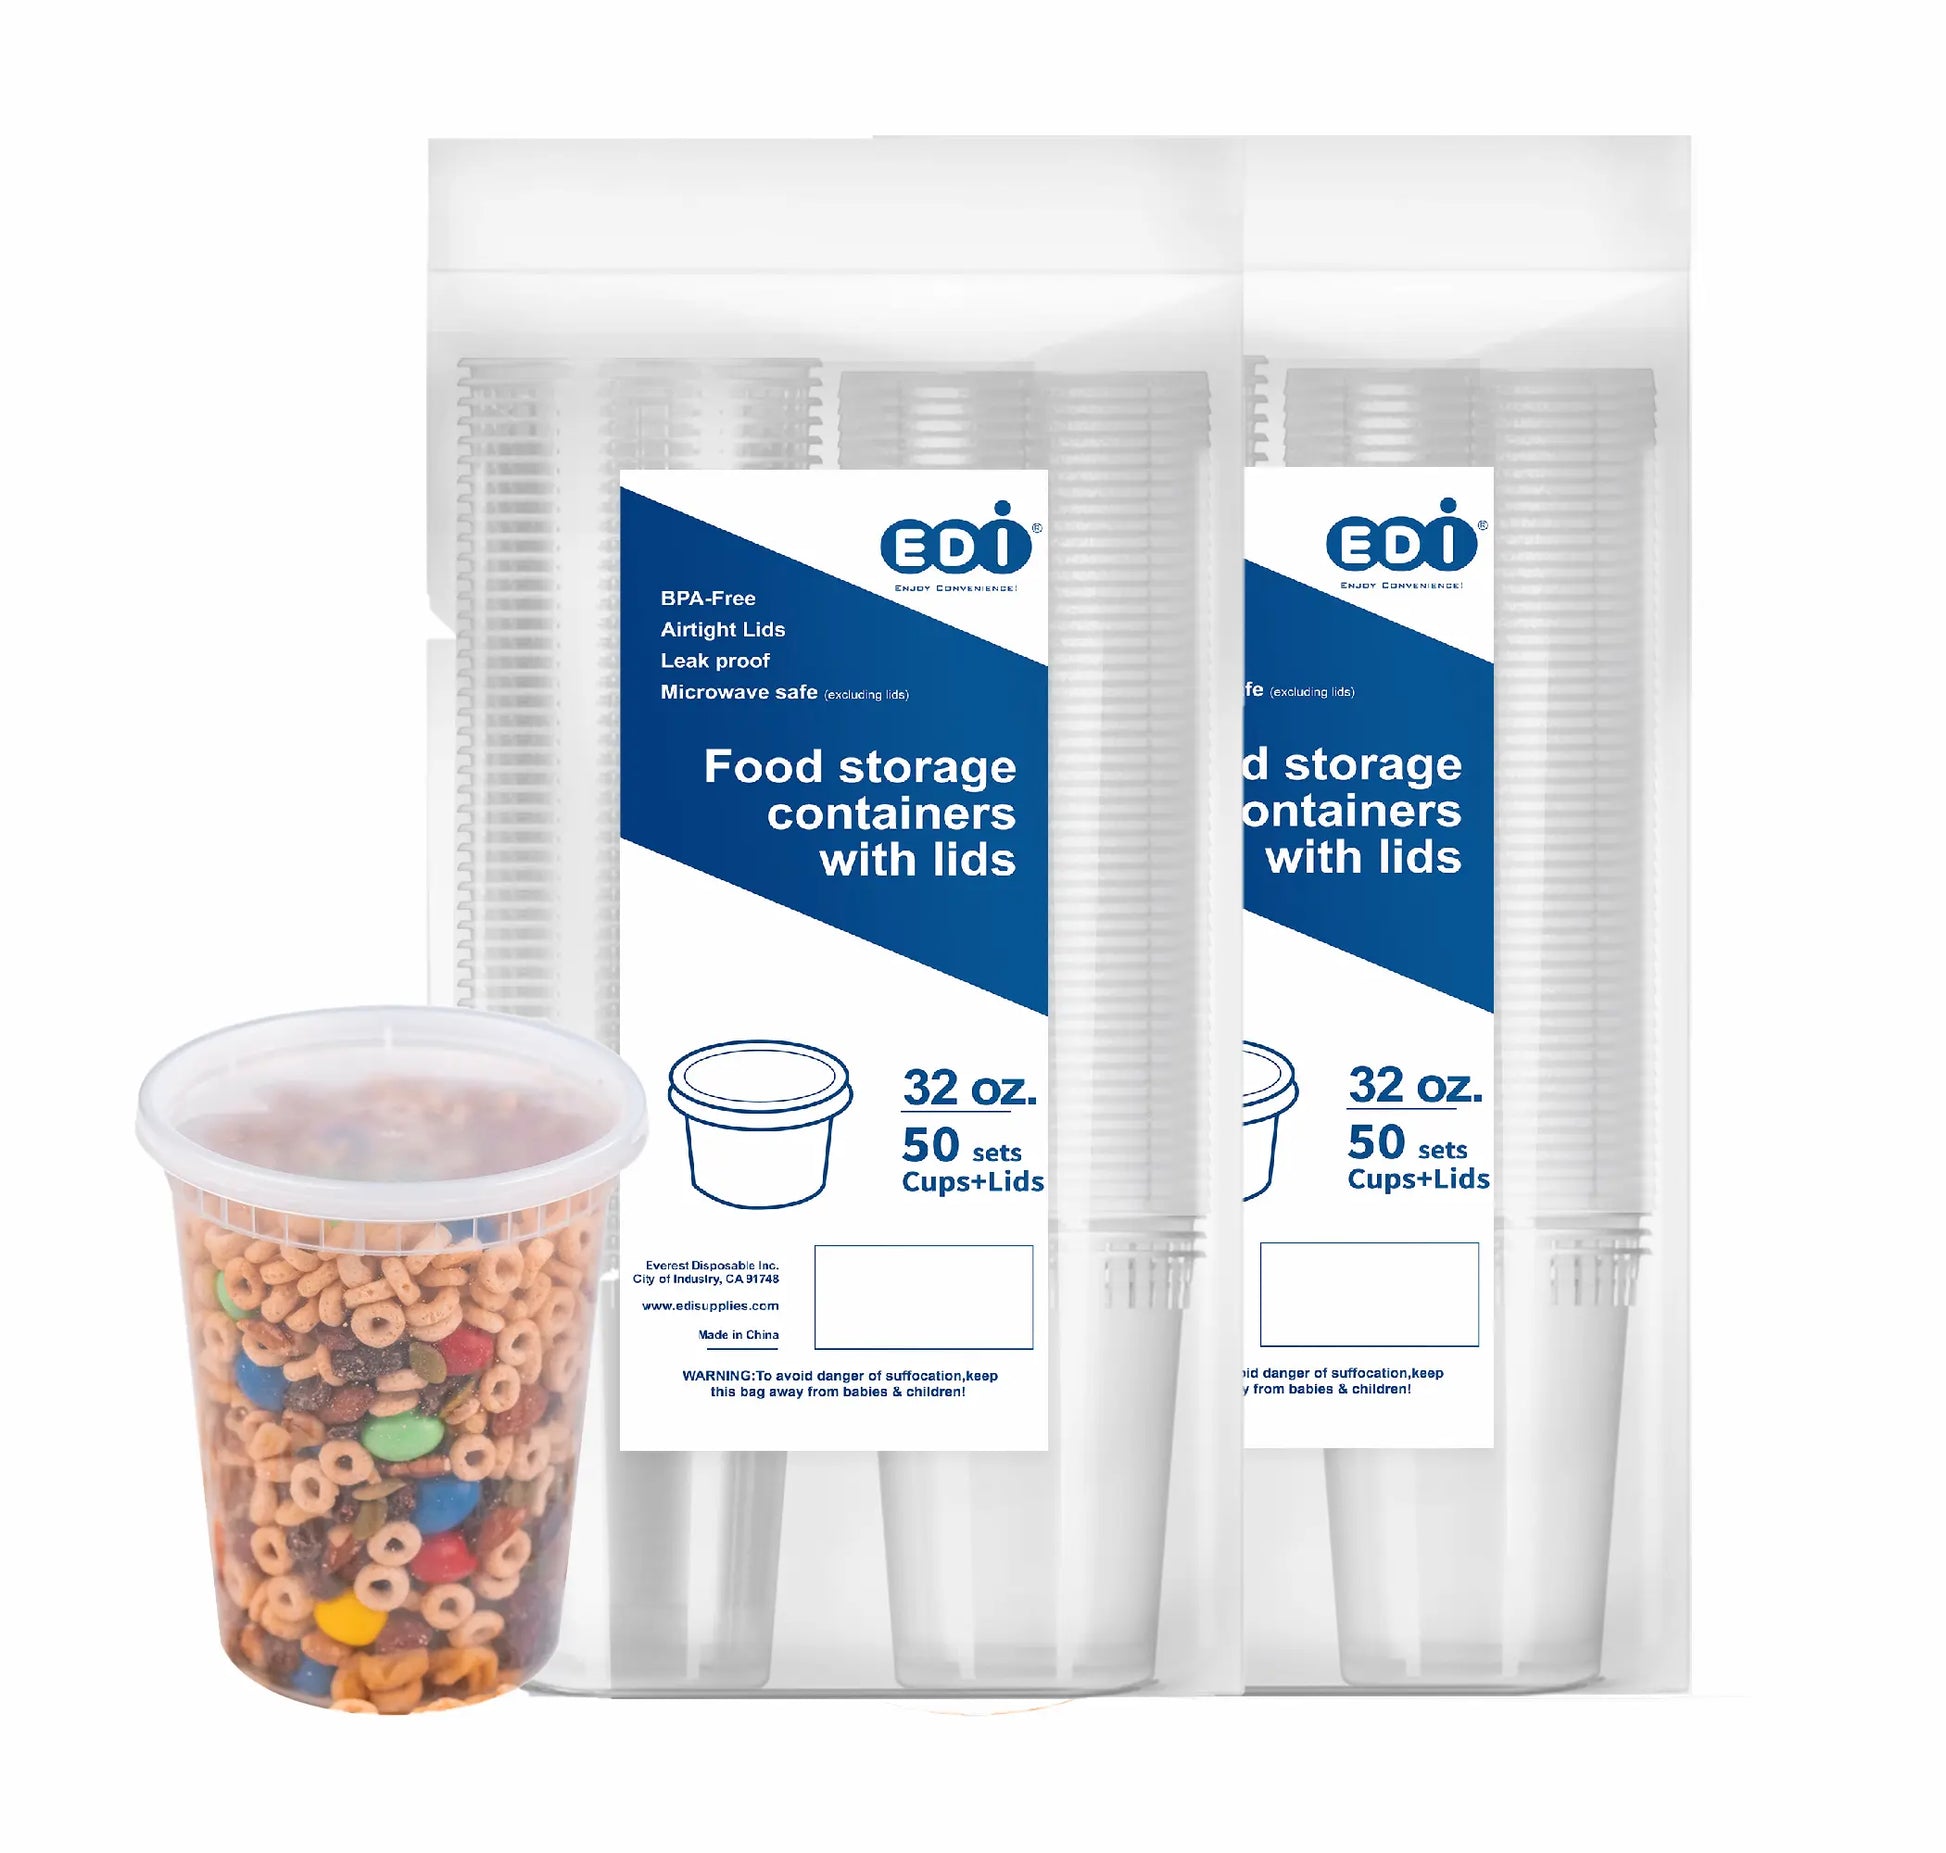 DuraHome - Deli Containers with Lids 8 oz. Leakproof - 40 Pack Plastic  Microwaveable Clear Food Storage Container